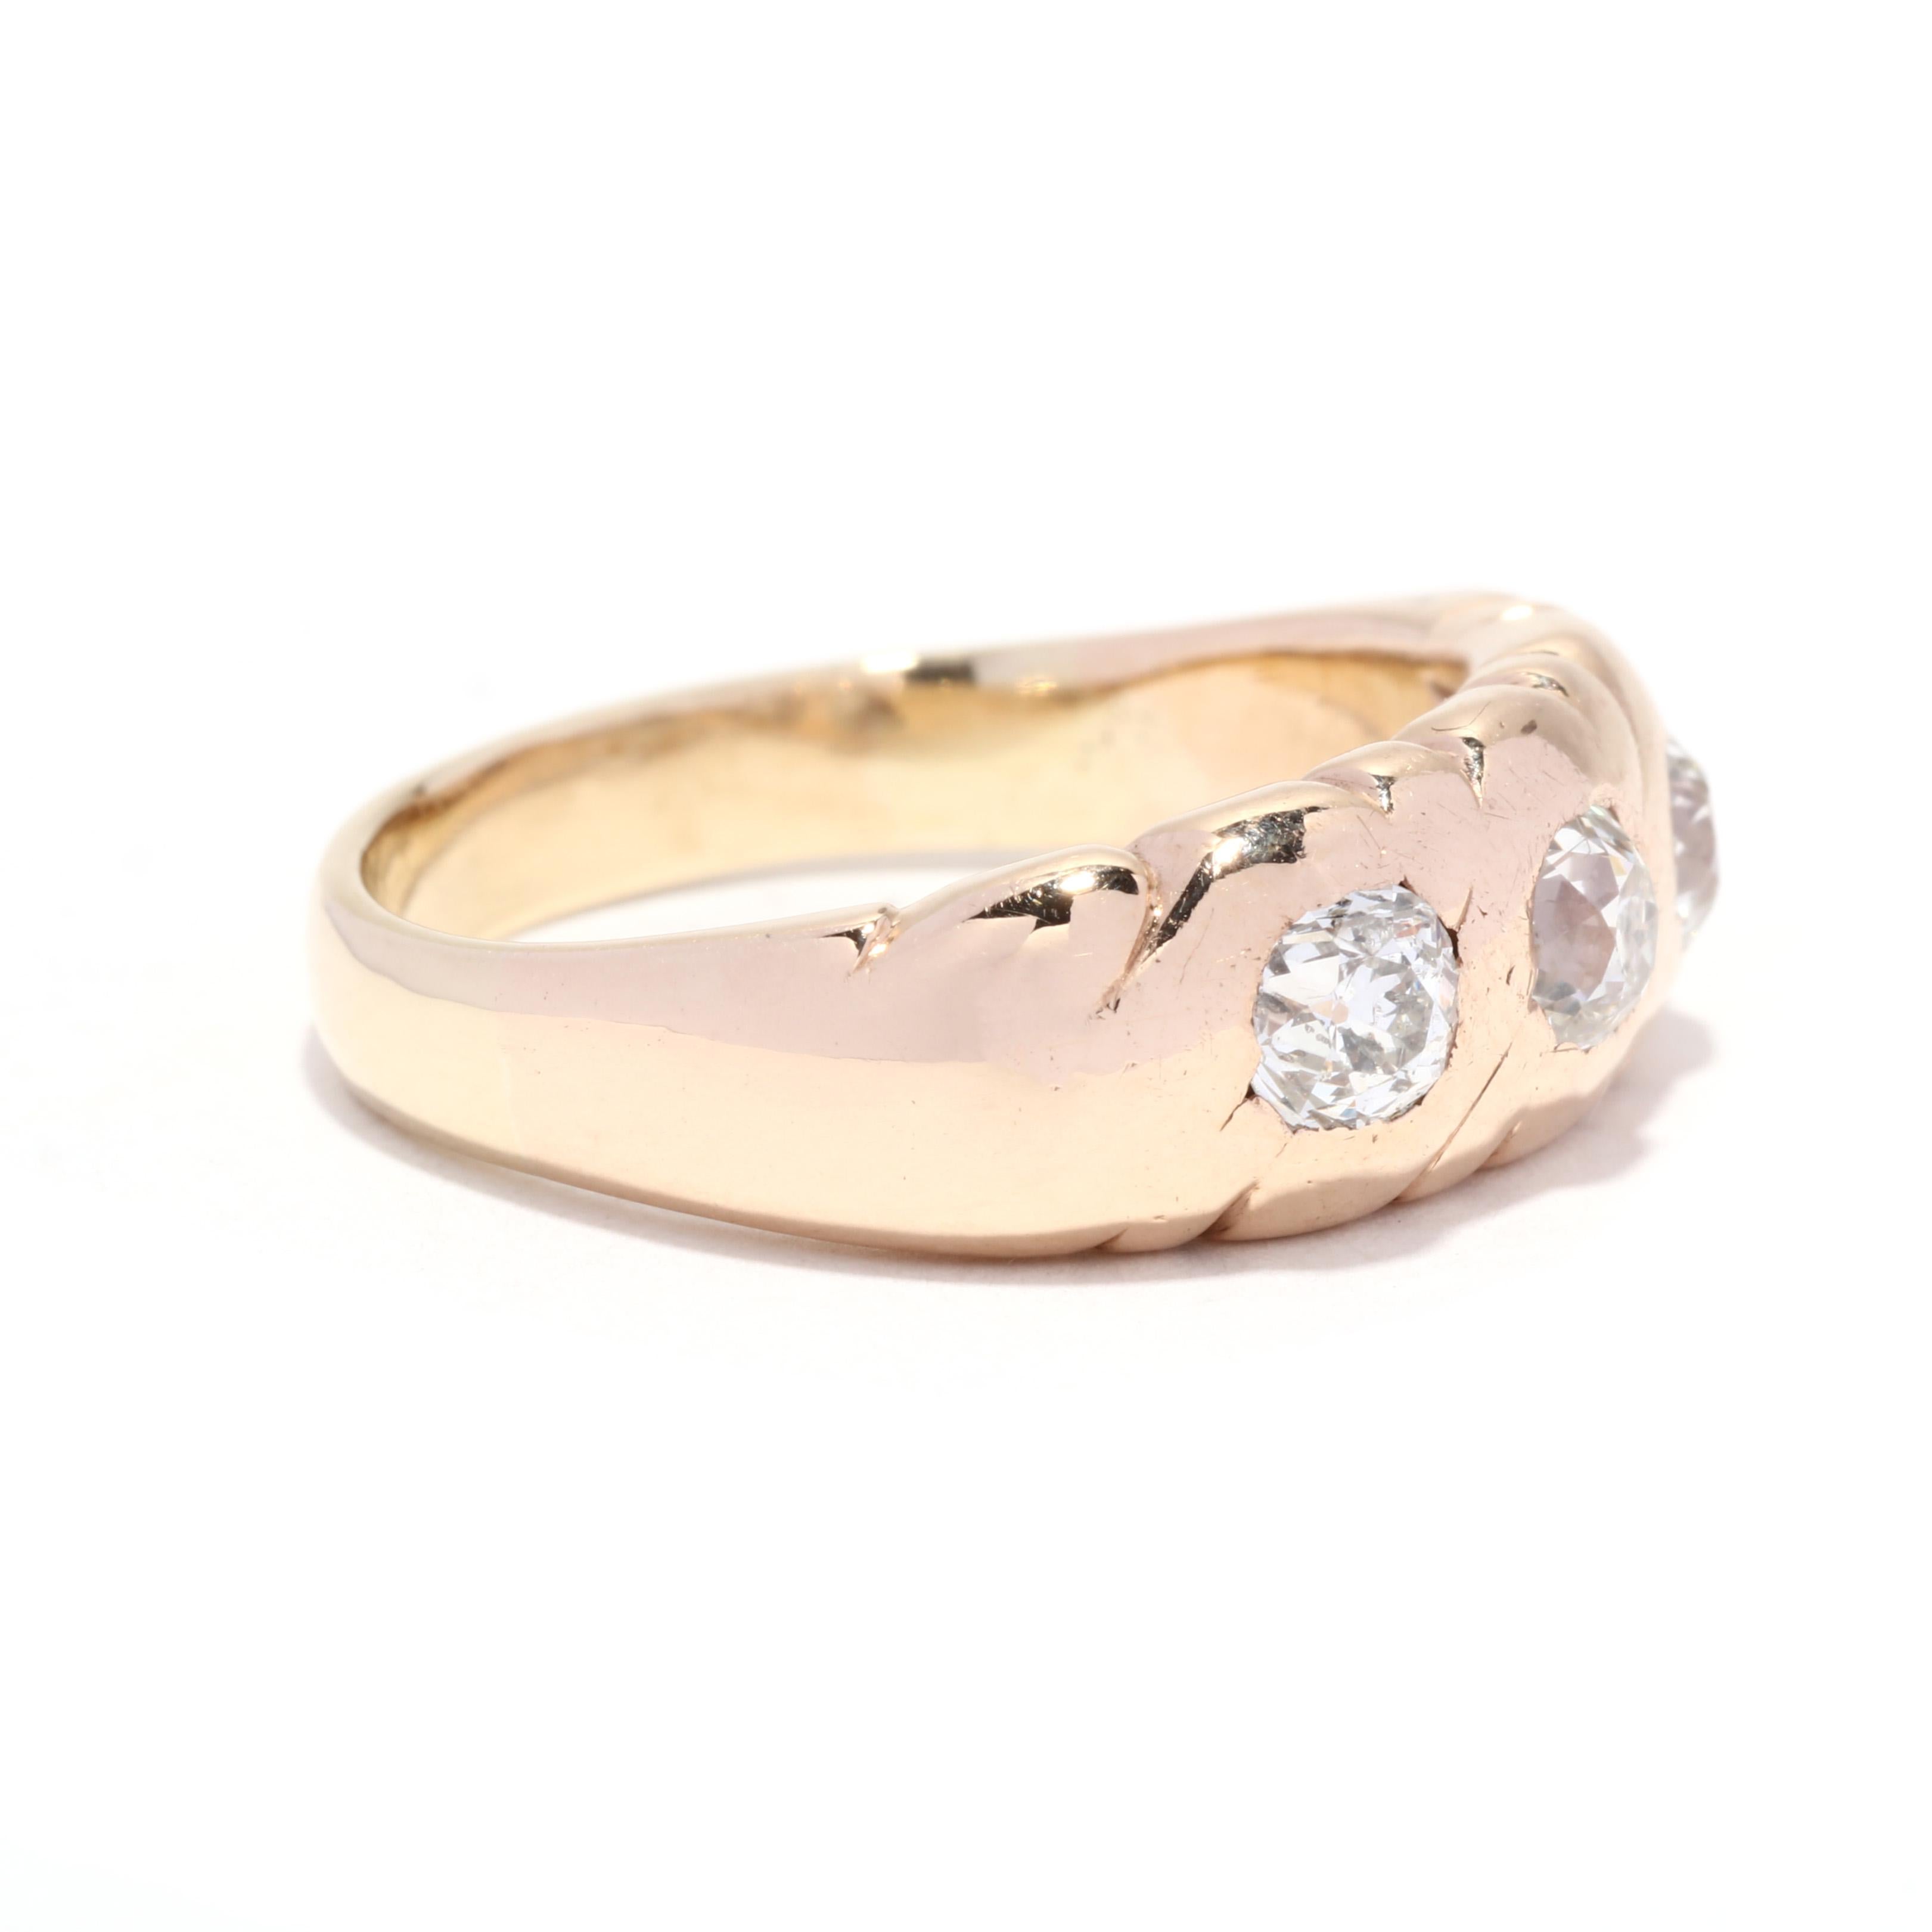 A Victorian 14 karat yellow gold old European cut diamond engagement ring. This three stone gypsy ring features three, flush set old European cut diamonds weighing approximately 1.15 total carats in a engraved edge mounting with a tapered